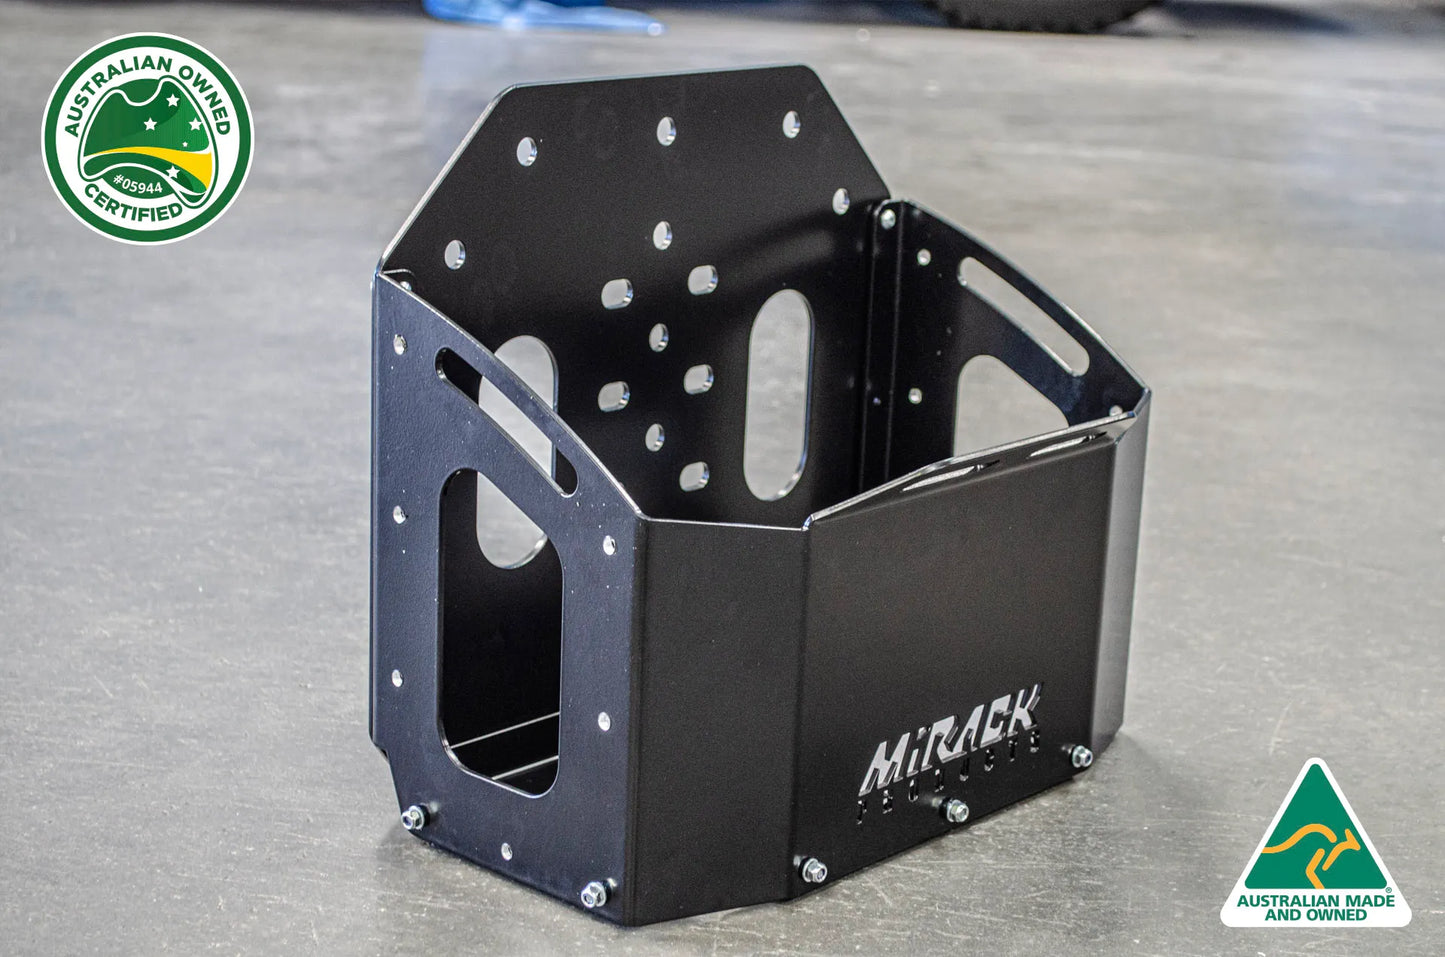 Mirack's laser-cut logo adds a touch of sophistication to its durable steel jerry can holder.